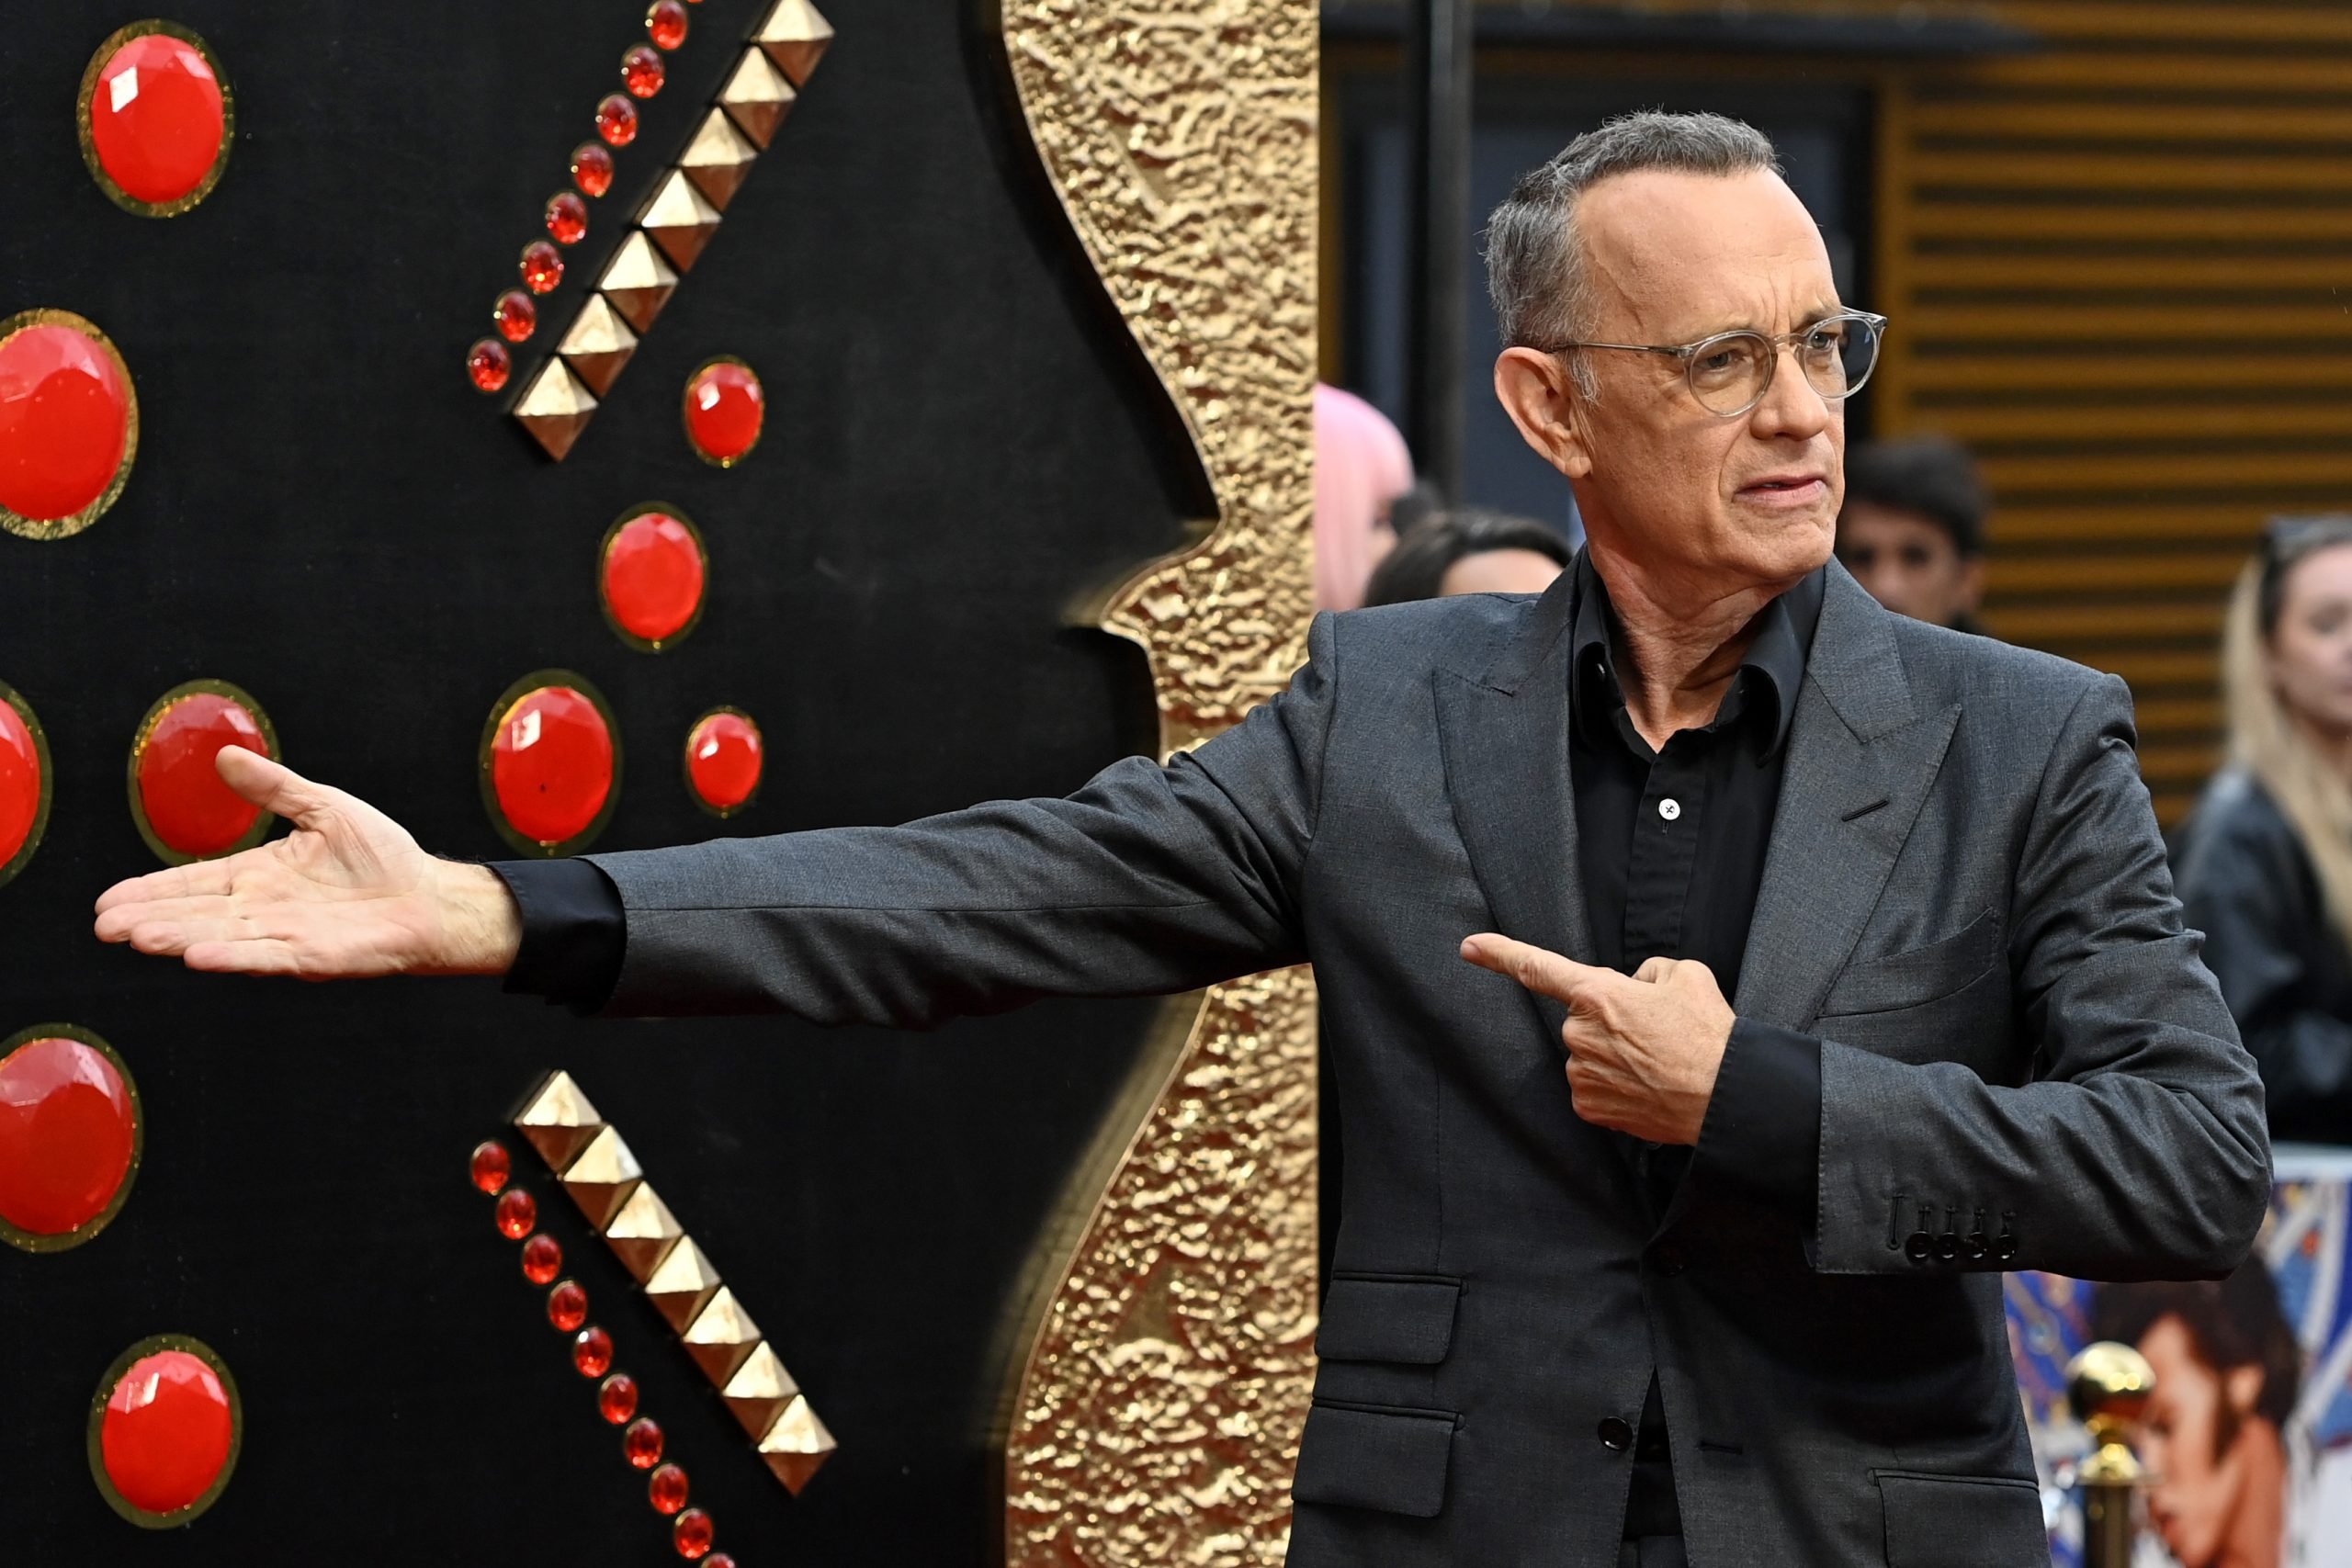 Tom Hanks, who plays Colonel Tom Parker, attends a UK special screening of Elvis